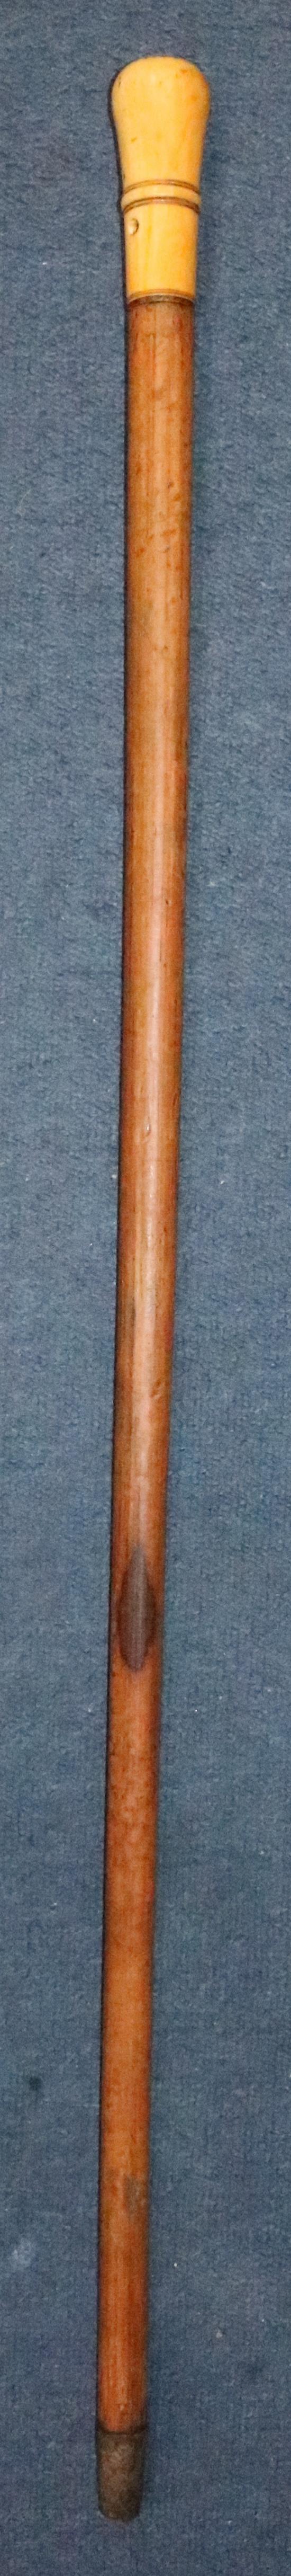 An English ivory and pique work handled walking cane, late 17th century, 98.5cm (38.75in.)